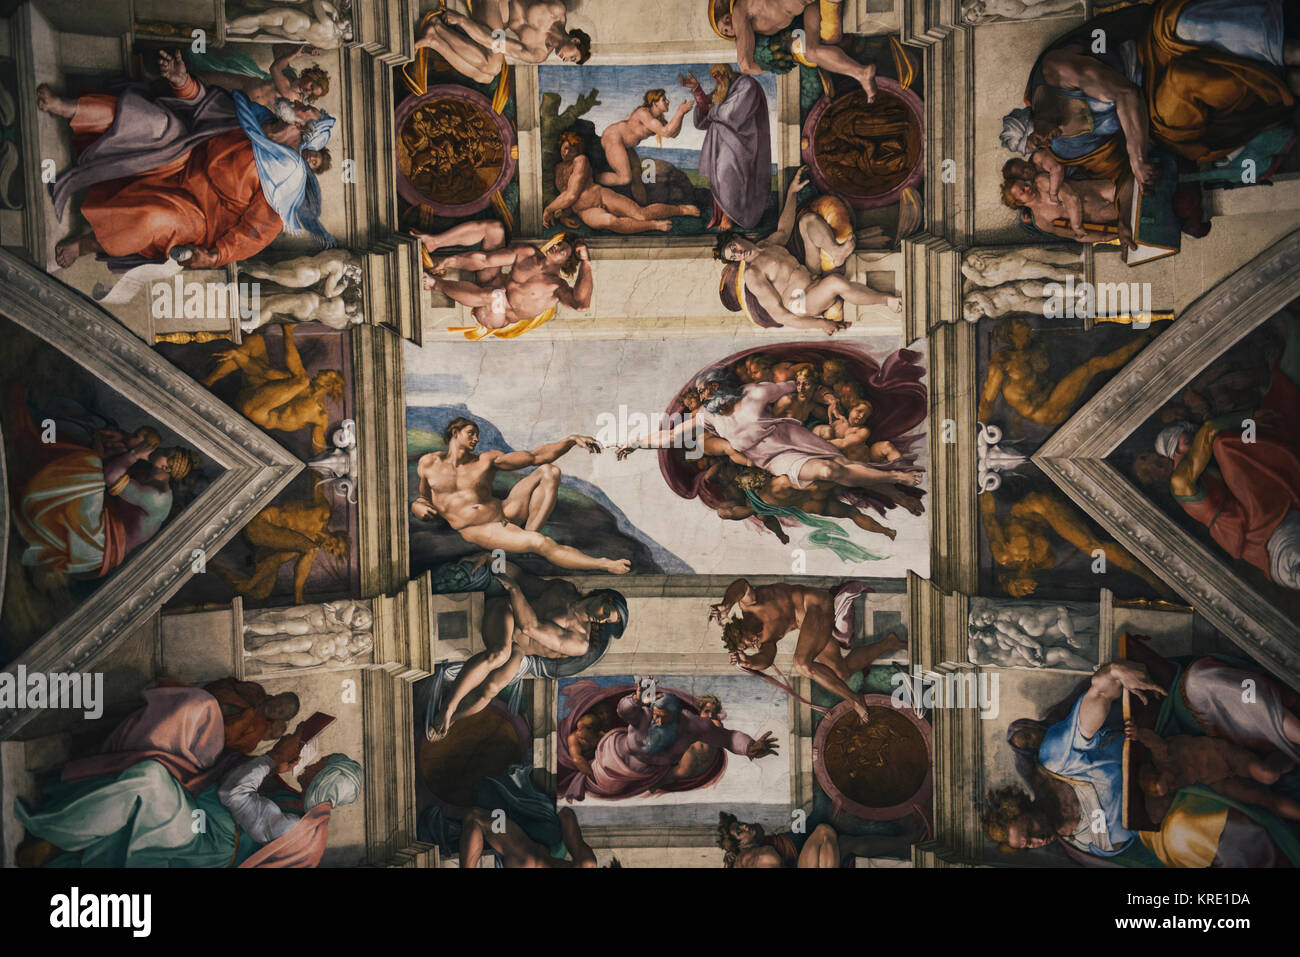 Vatican, Italy - October 6, 2016: Detail of the Universal Judgement inside the Sistine Chapel in Vatican City. Stock Photo